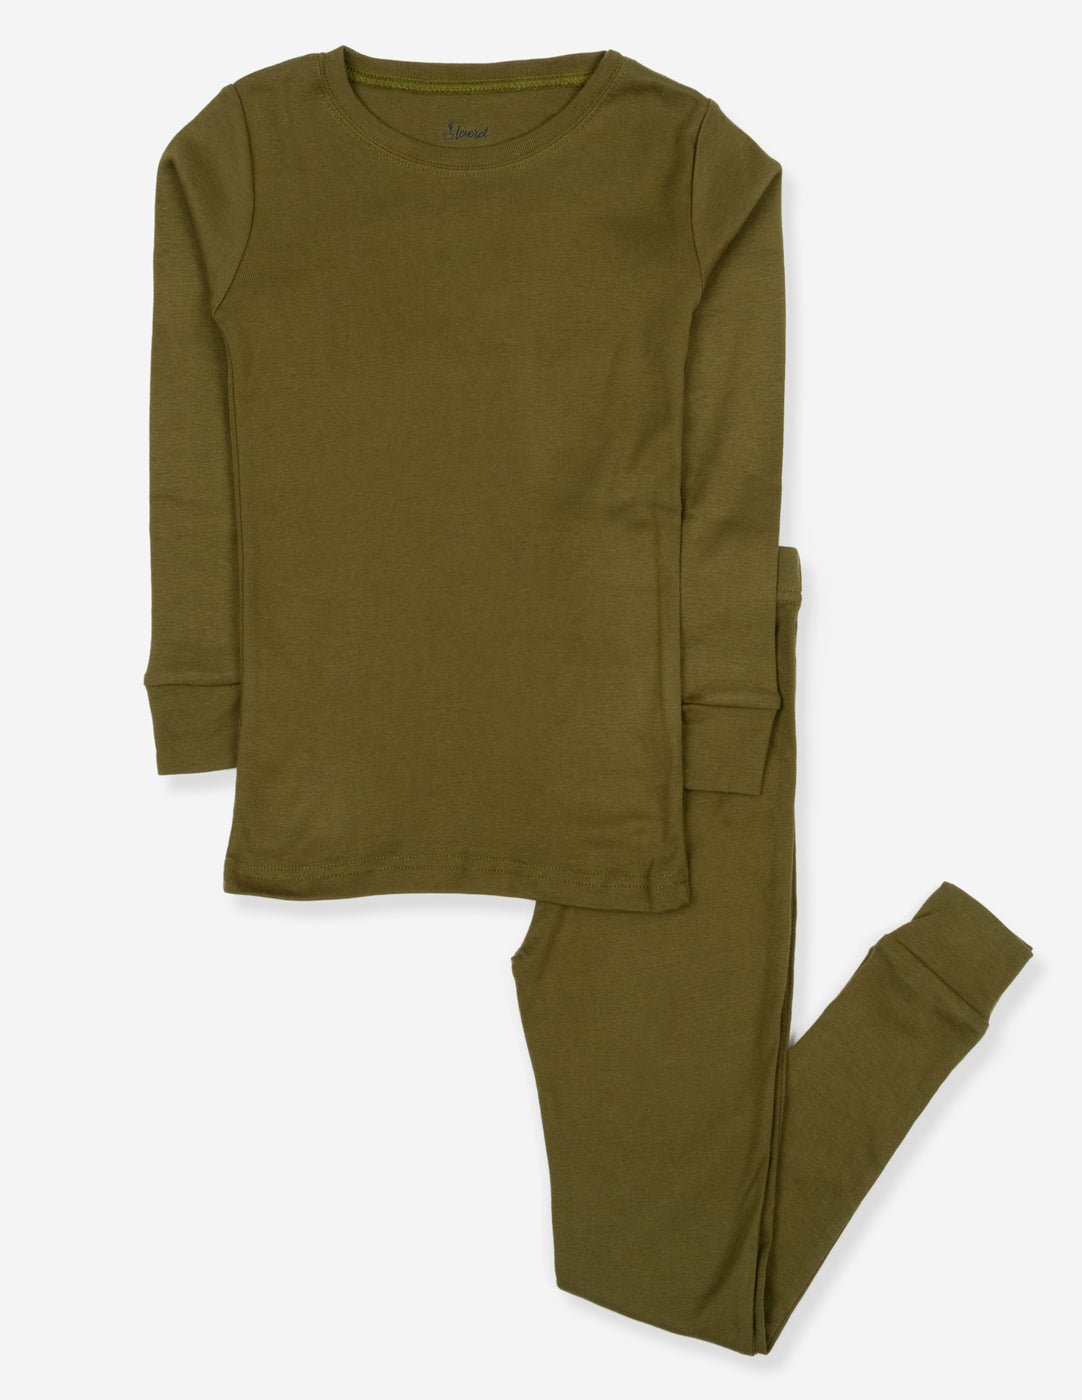 solid color olive green kids cotton pajamas